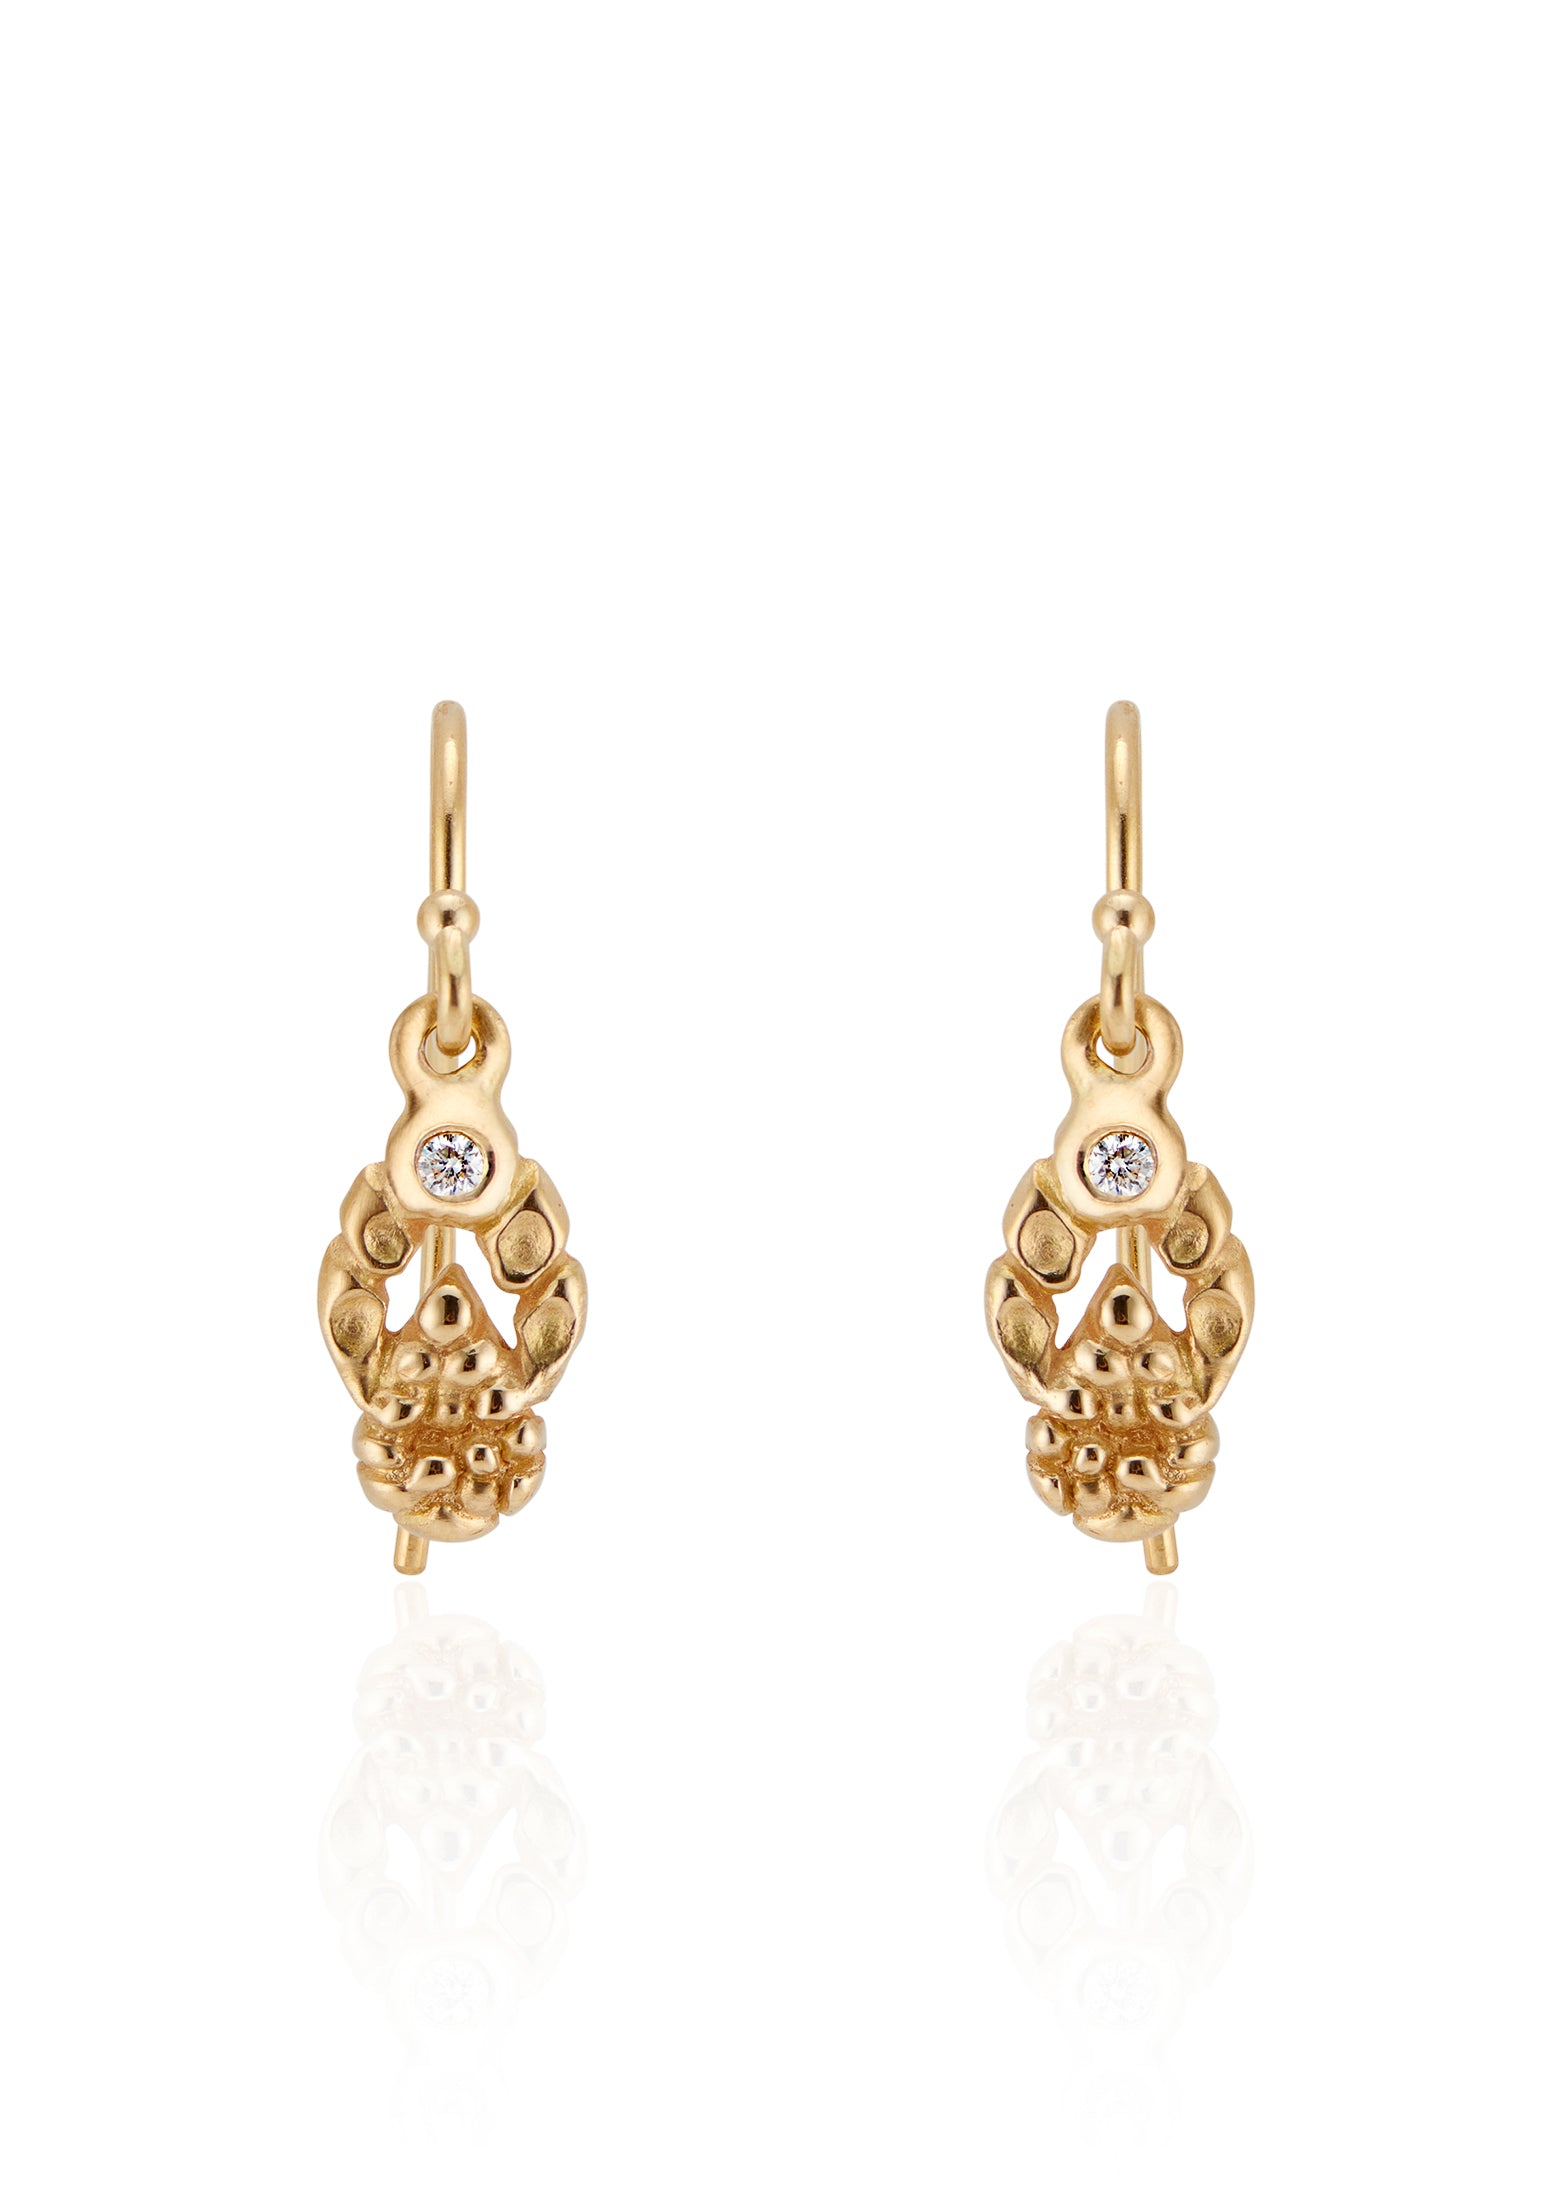 Exquisite details grace the elegant lines of the Pincer earring, a whimsical design that creates the illusion of golden drops being held in place by textured pincers. Gleaming diamonds at the top of the earring add a brilliant sparkle—a true celebration of craftsmanship. 